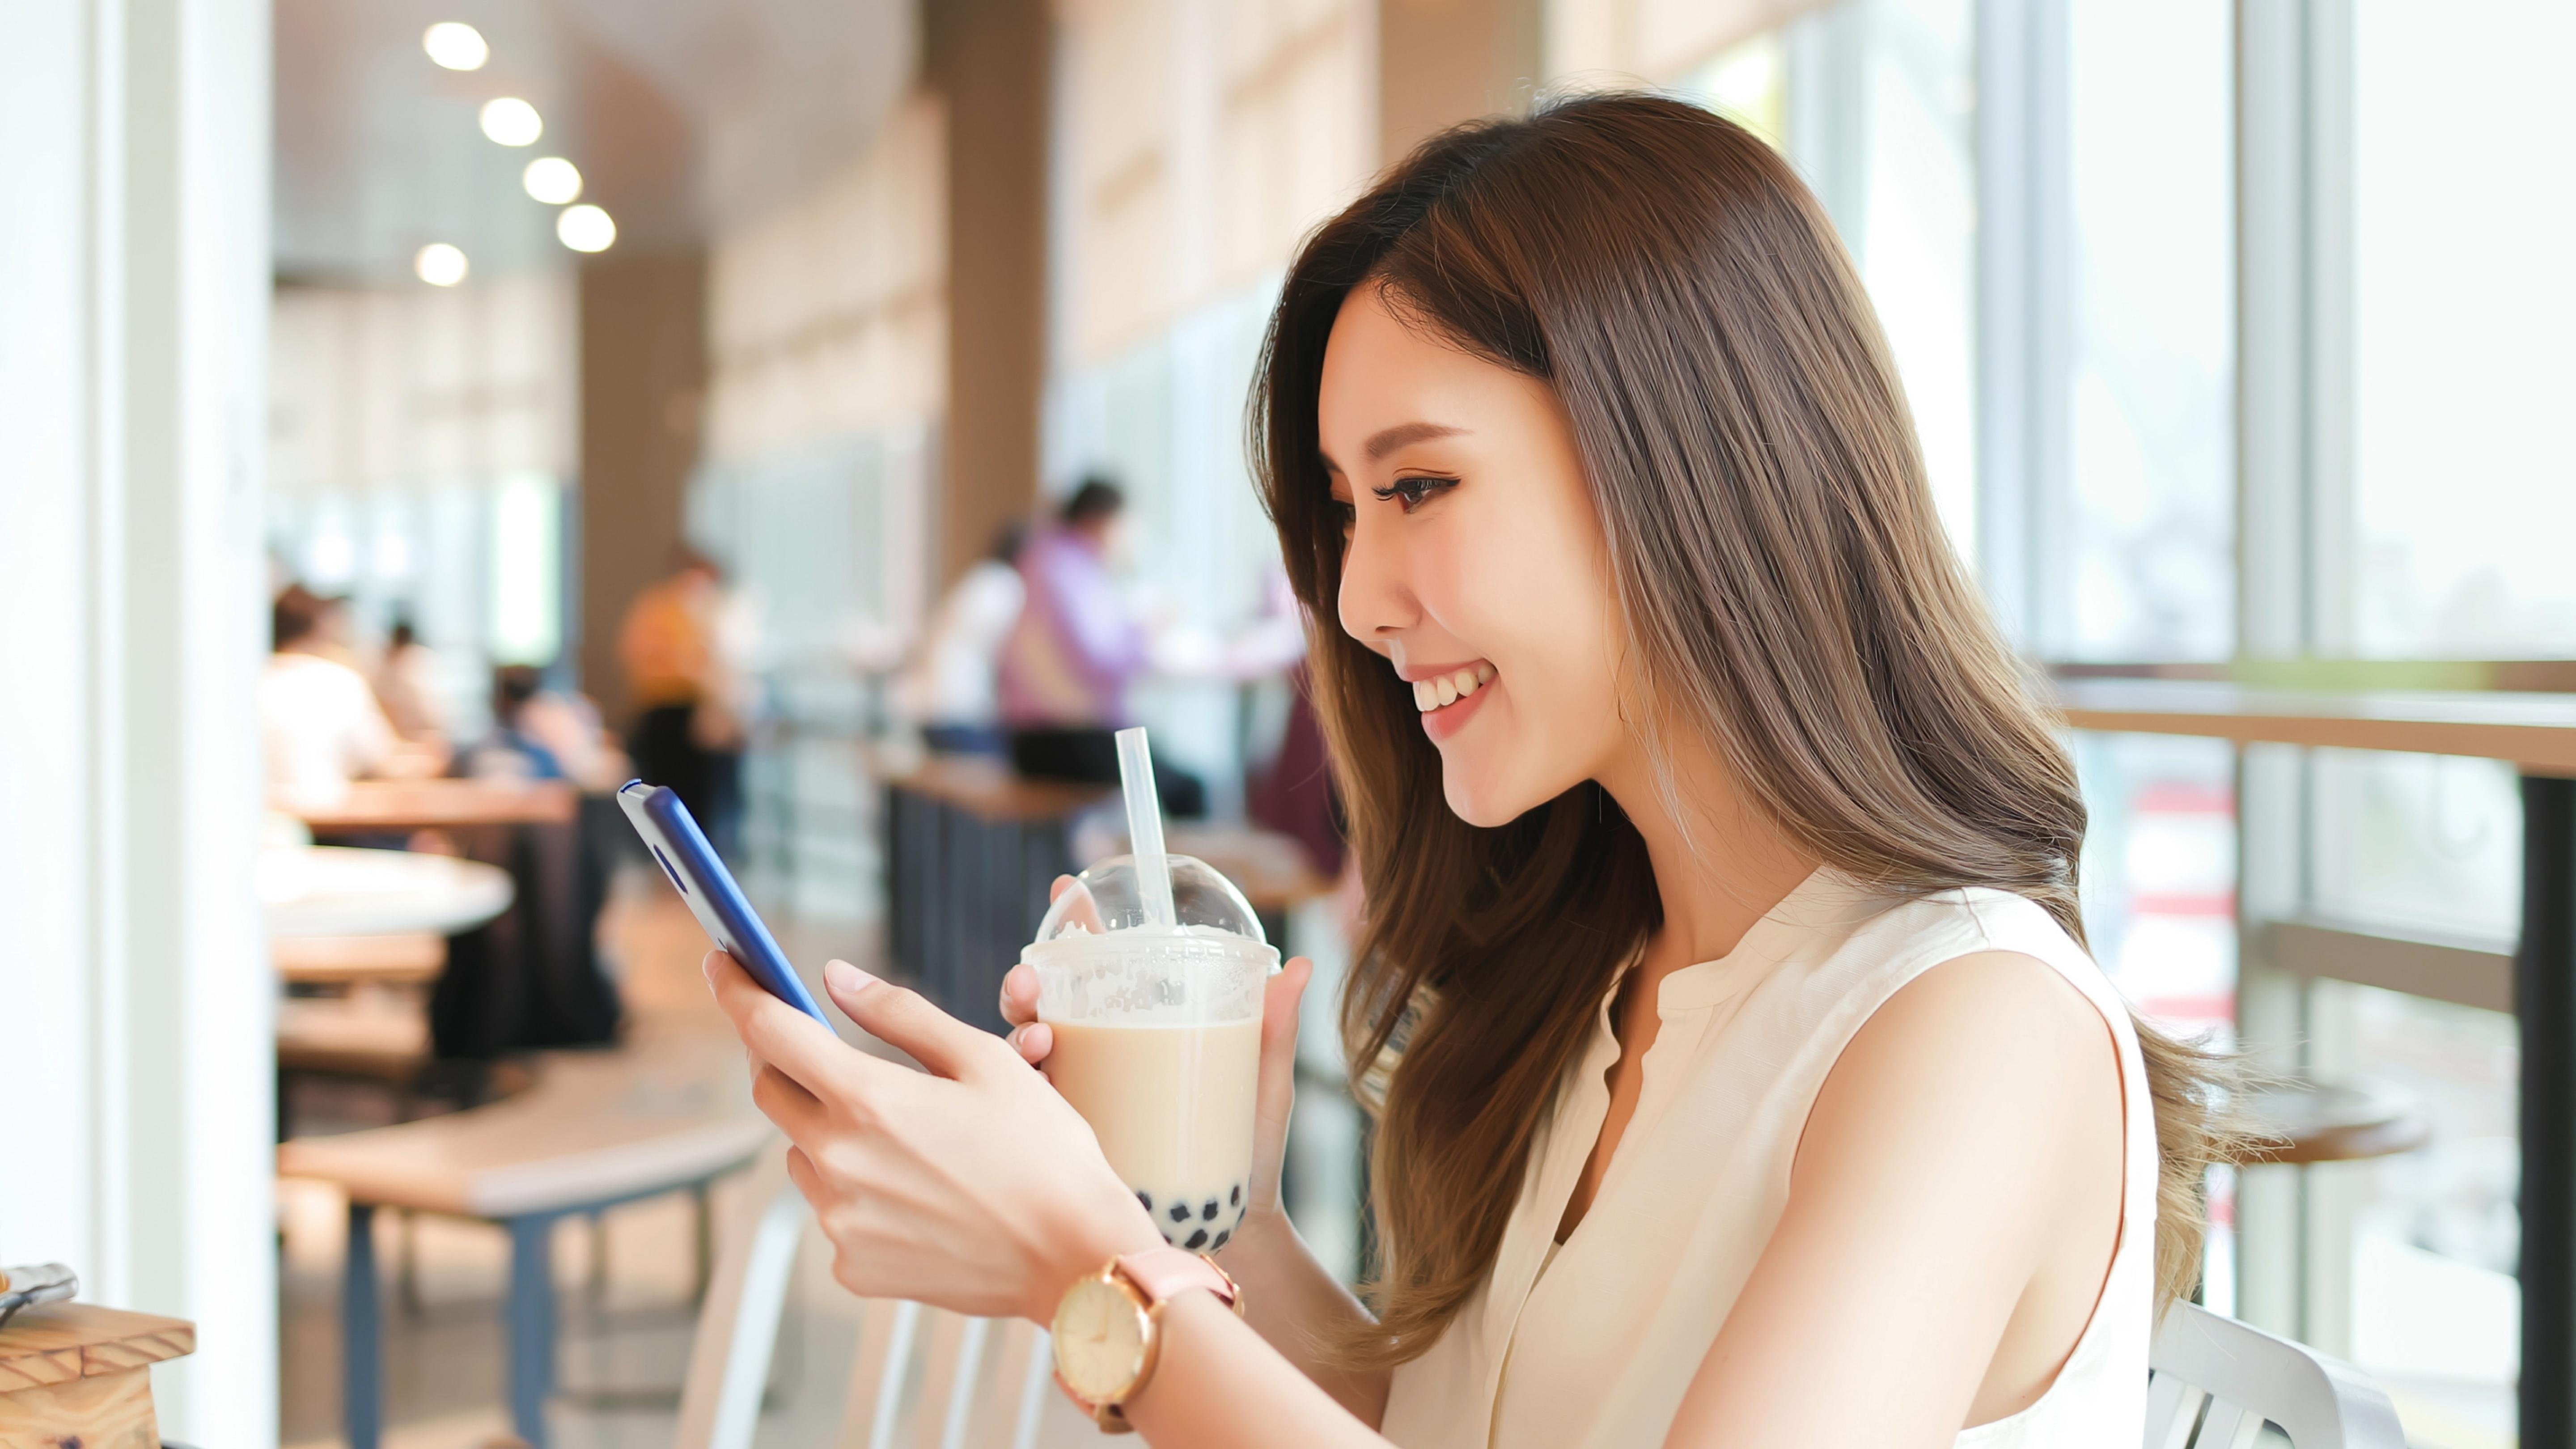 Greater brand awareness and exposure for Bubble Tea Shops